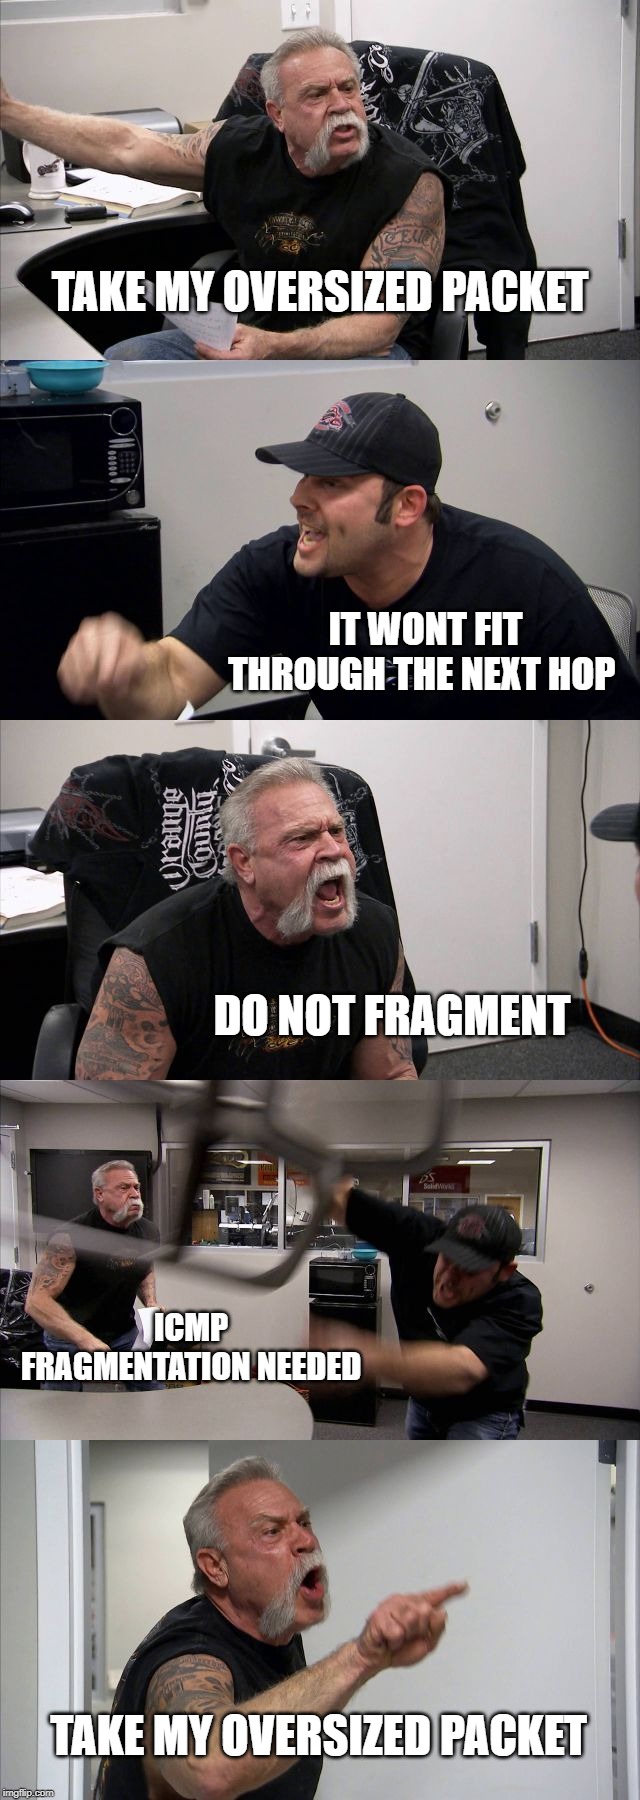 ICMP Fragmentation Needed | TAKE MY OVERSIZED PACKET; IT WONT FIT THROUGH THE NEXT HOP; DO NOT FRAGMENT; ICMP FRAGMENTATION NEEDED; TAKE MY OVERSIZED PACKET | image tagged in memes,american chopper argument,network | made w/ Imgflip meme maker